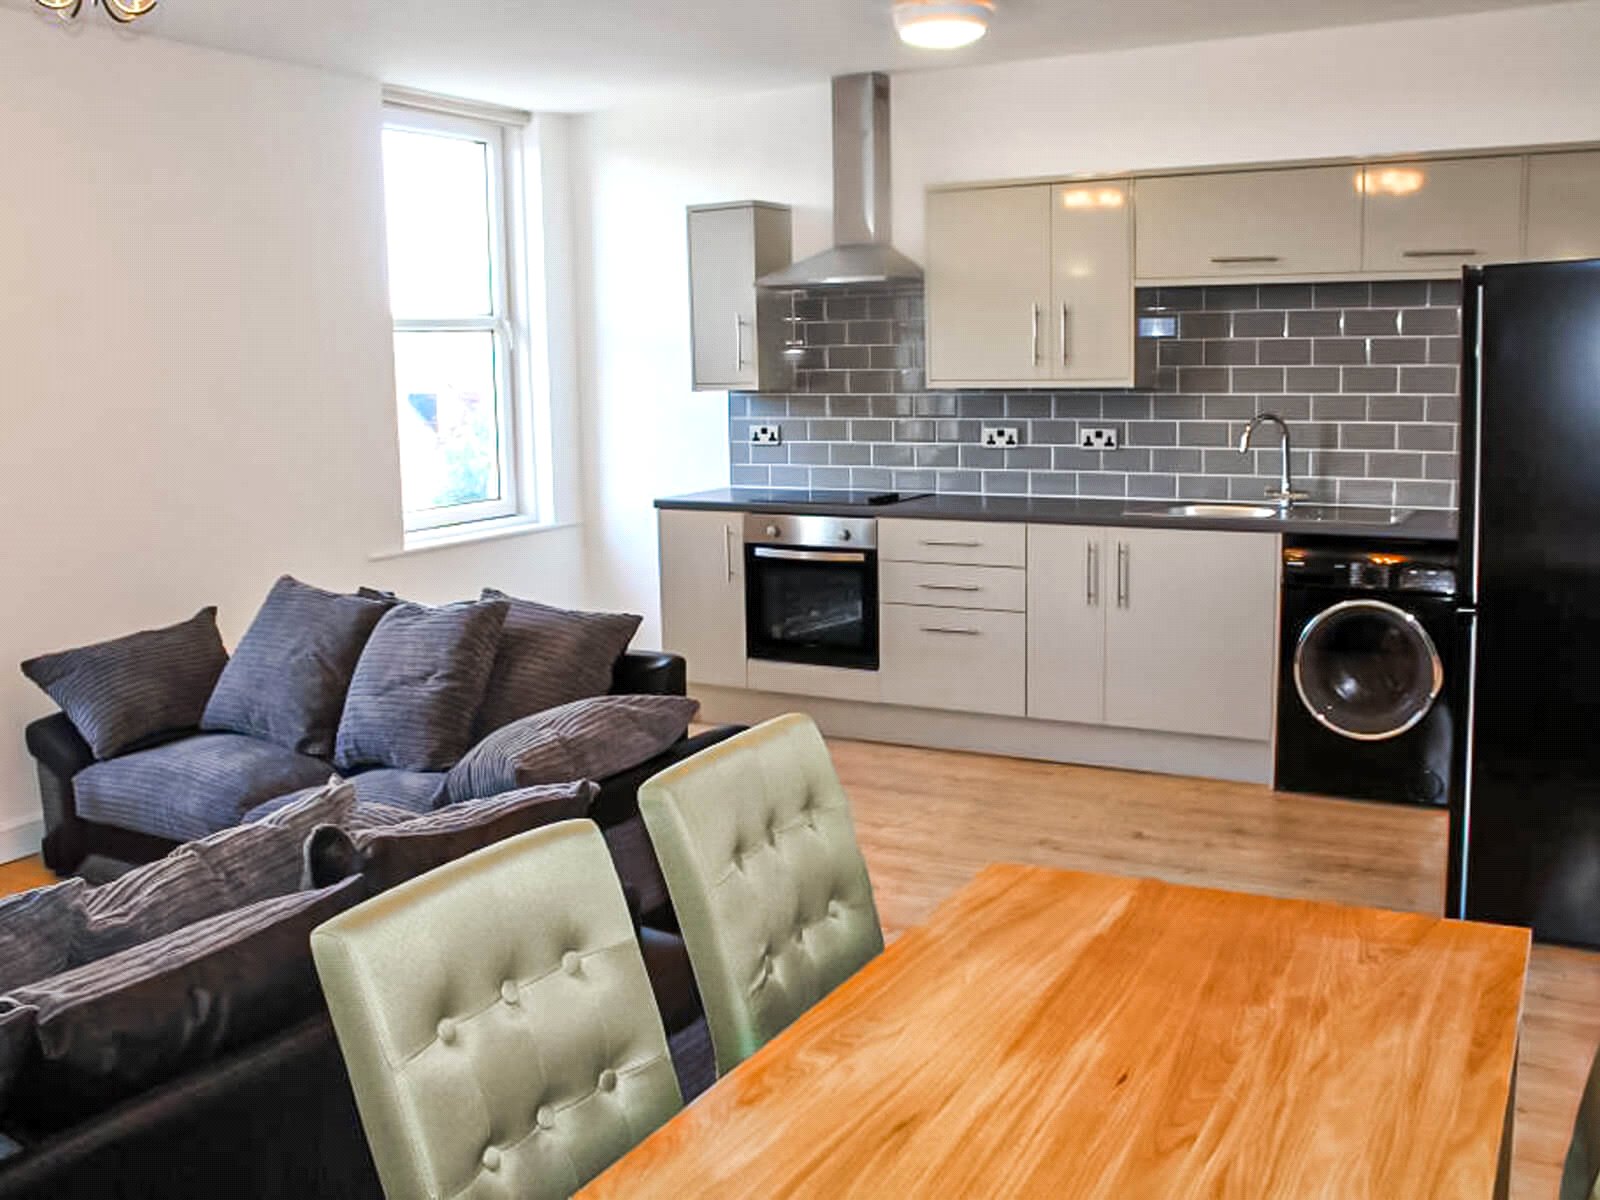 2 bed apartment for rent in Harrogate. From YPP